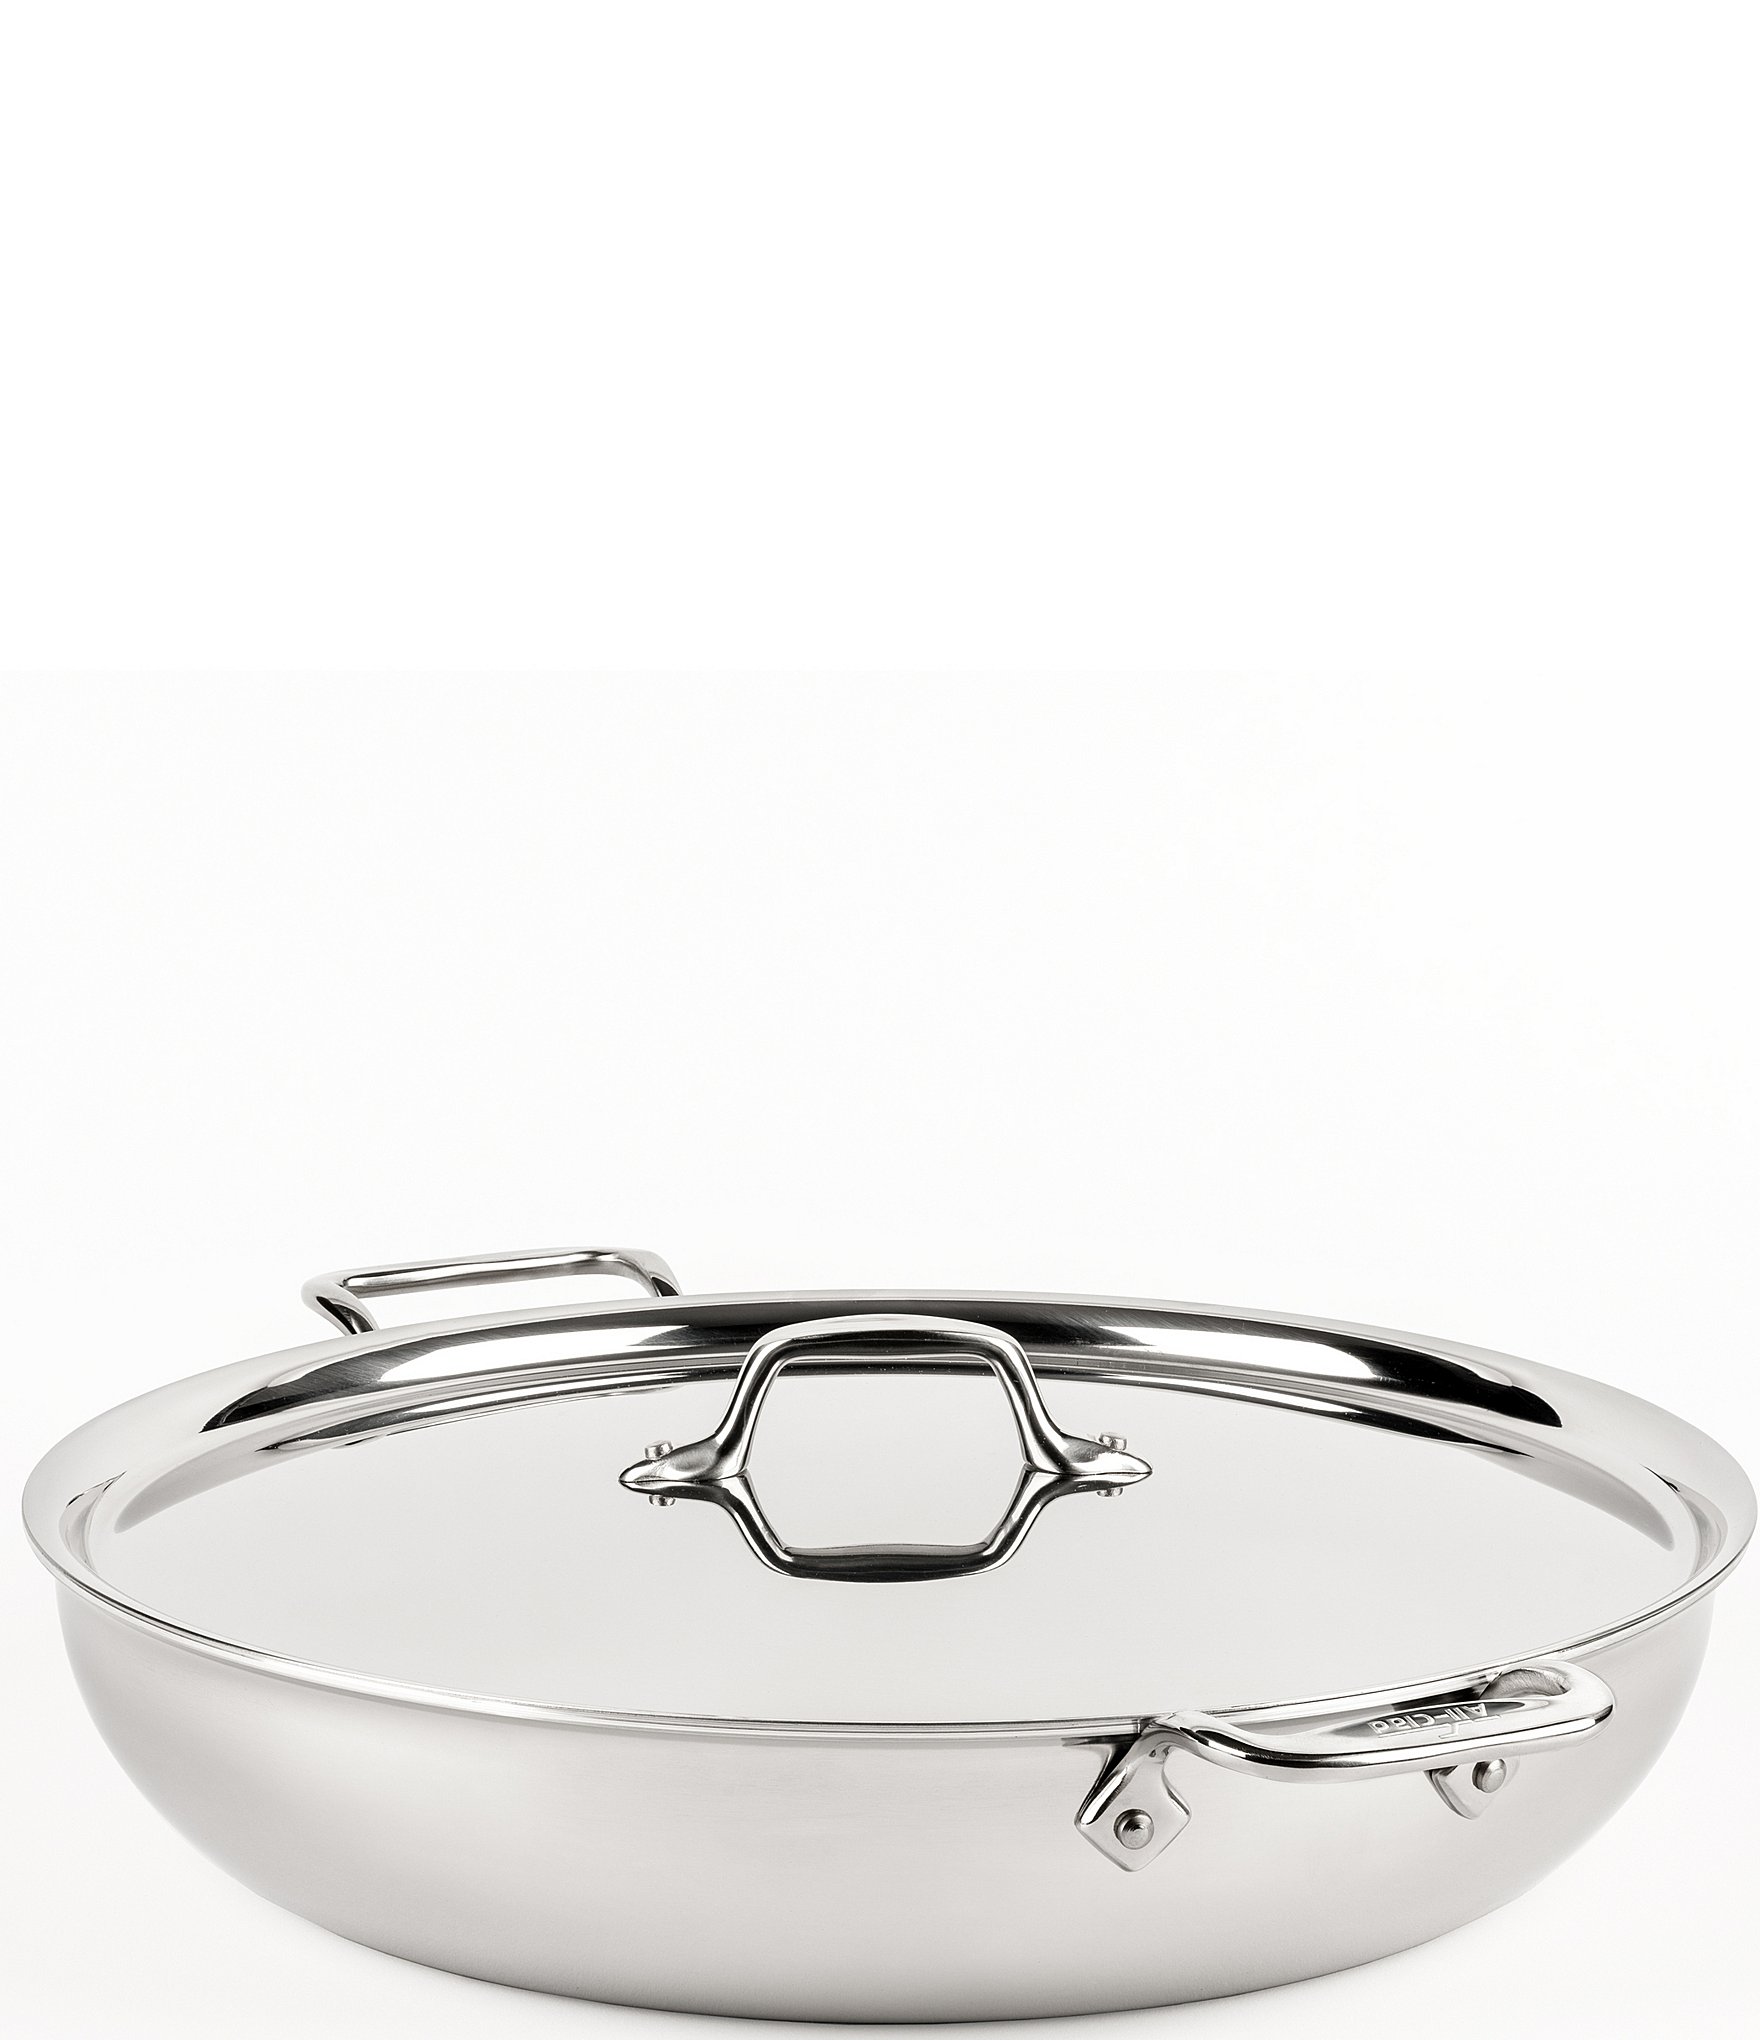 https://dimg.dillards.com/is/image/DillardsZoom/zoom/all-clad-d3-stainless-3-ply-bonded-cookware-sunday-supper-pan-with-lid-7-quart/00000000_zi_20417903.jpg